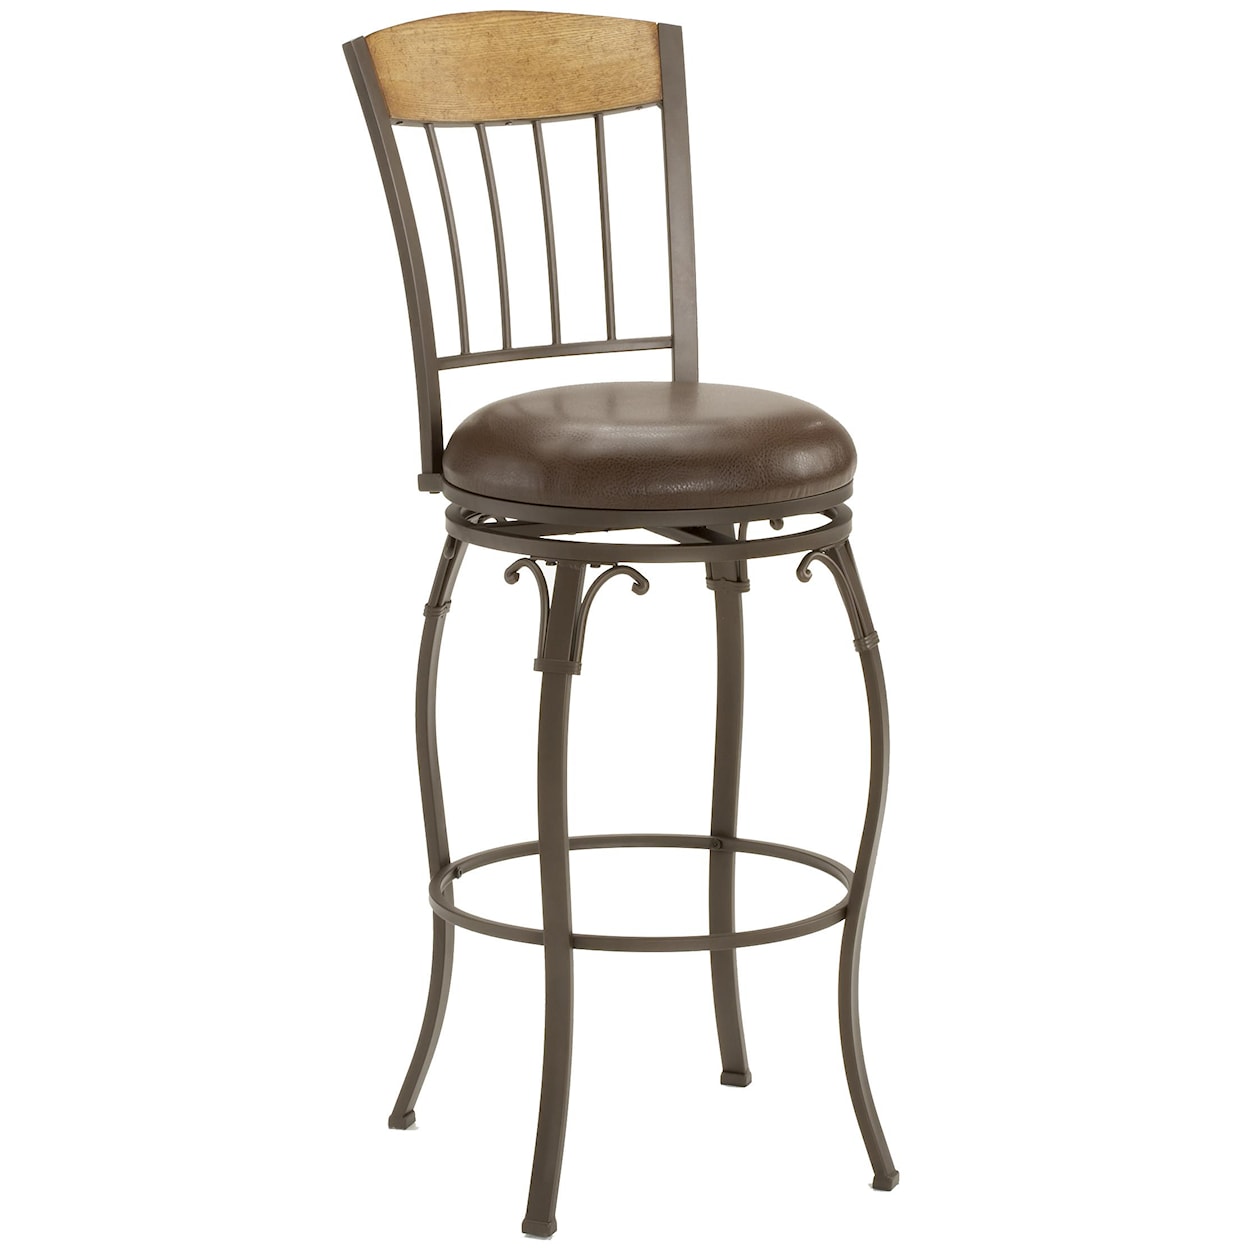 Hillsdale Bar Stools 30" Bar Height Lakeview Swivel Stool 